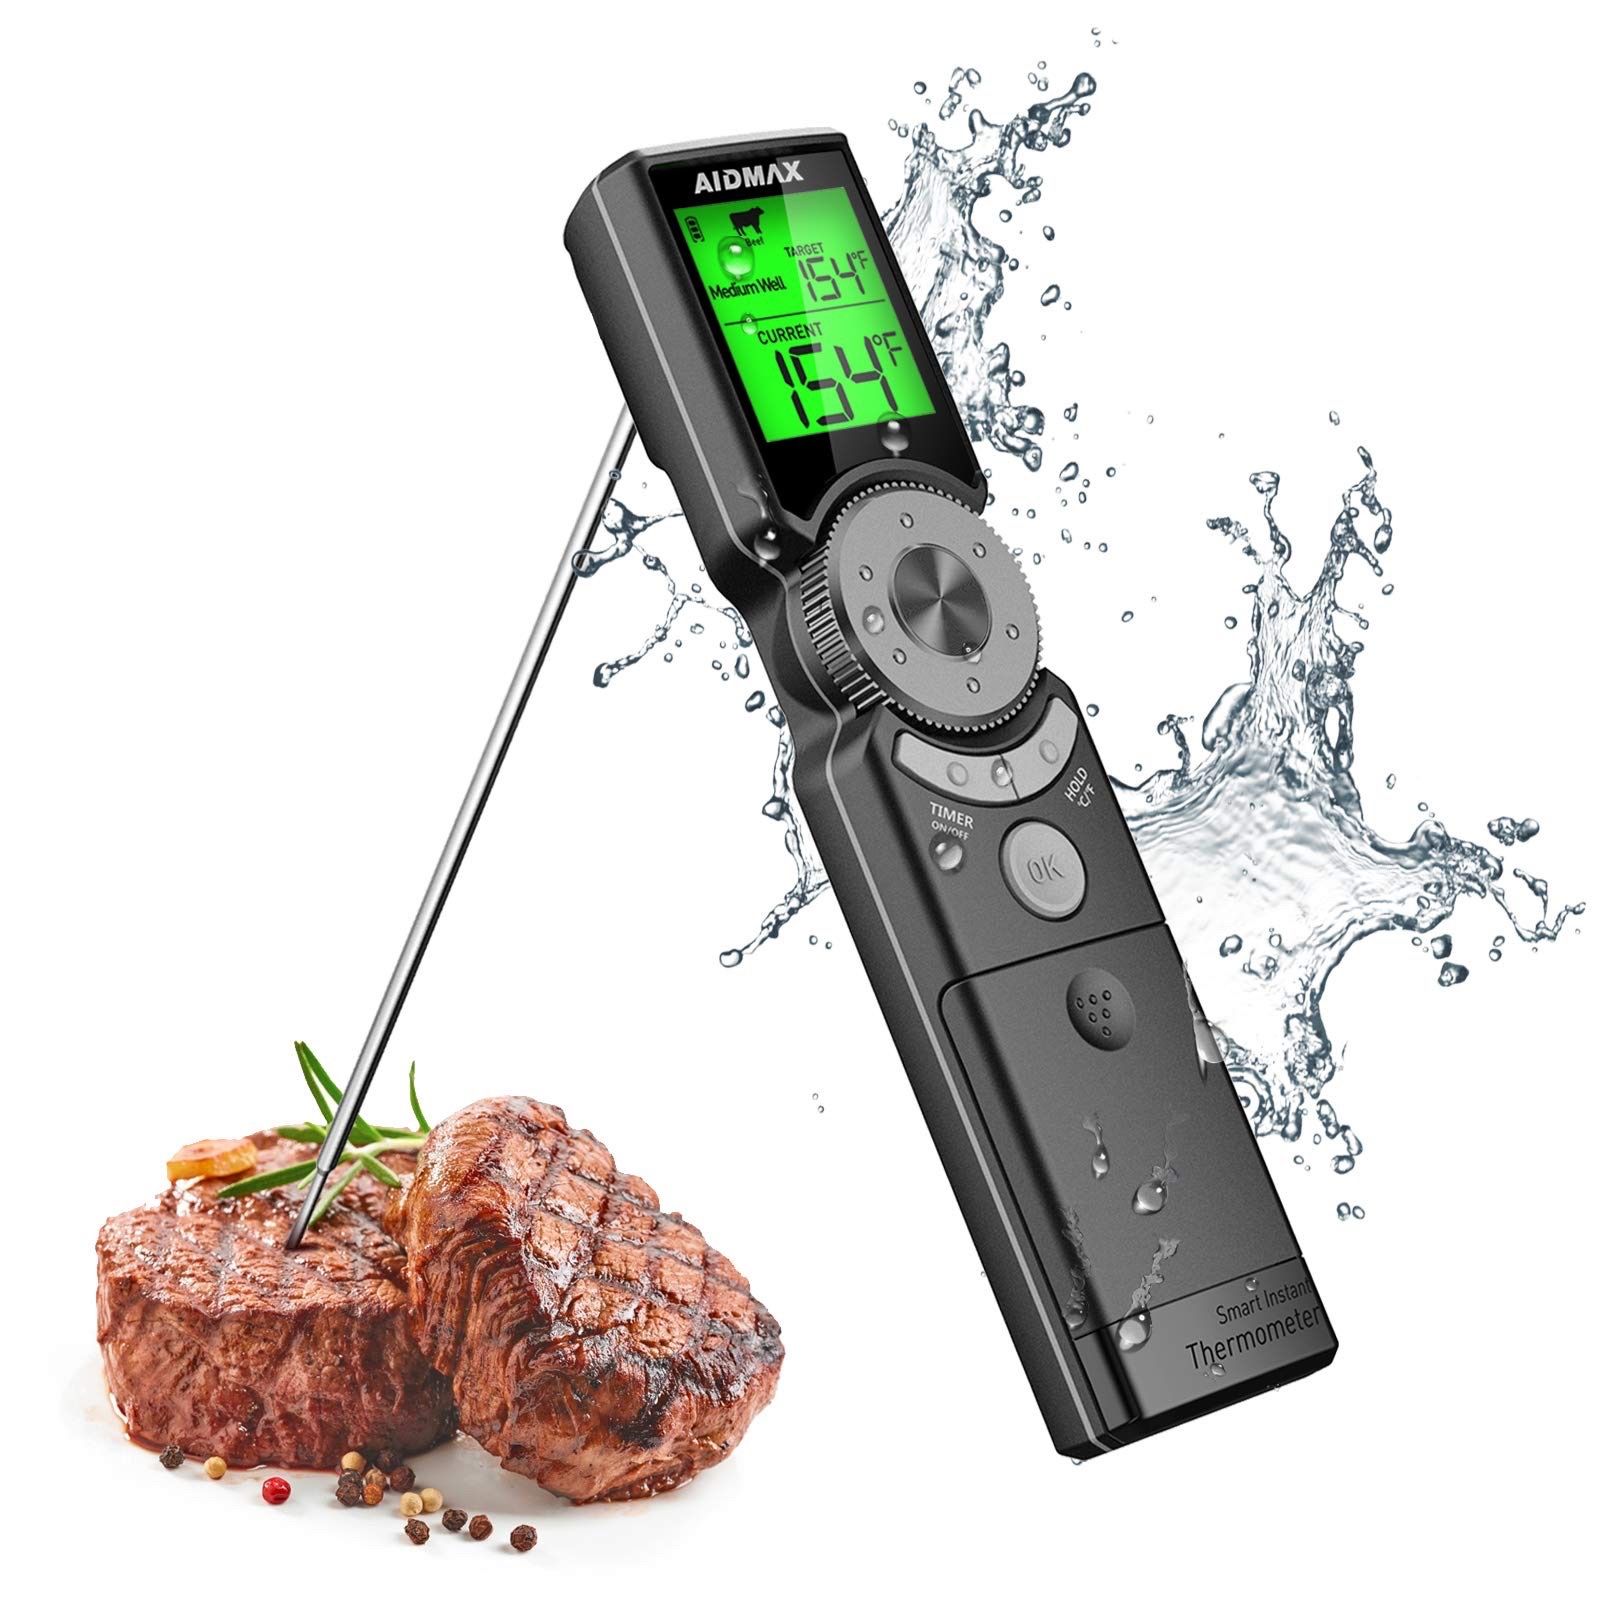 Instant Read Meat Thermometer for Cooking, Grilling, BBQ, Baking, Turkey - Mini6 IP65 Digital Waterproof Kitchen Food Thermometers with Large 3 Colors